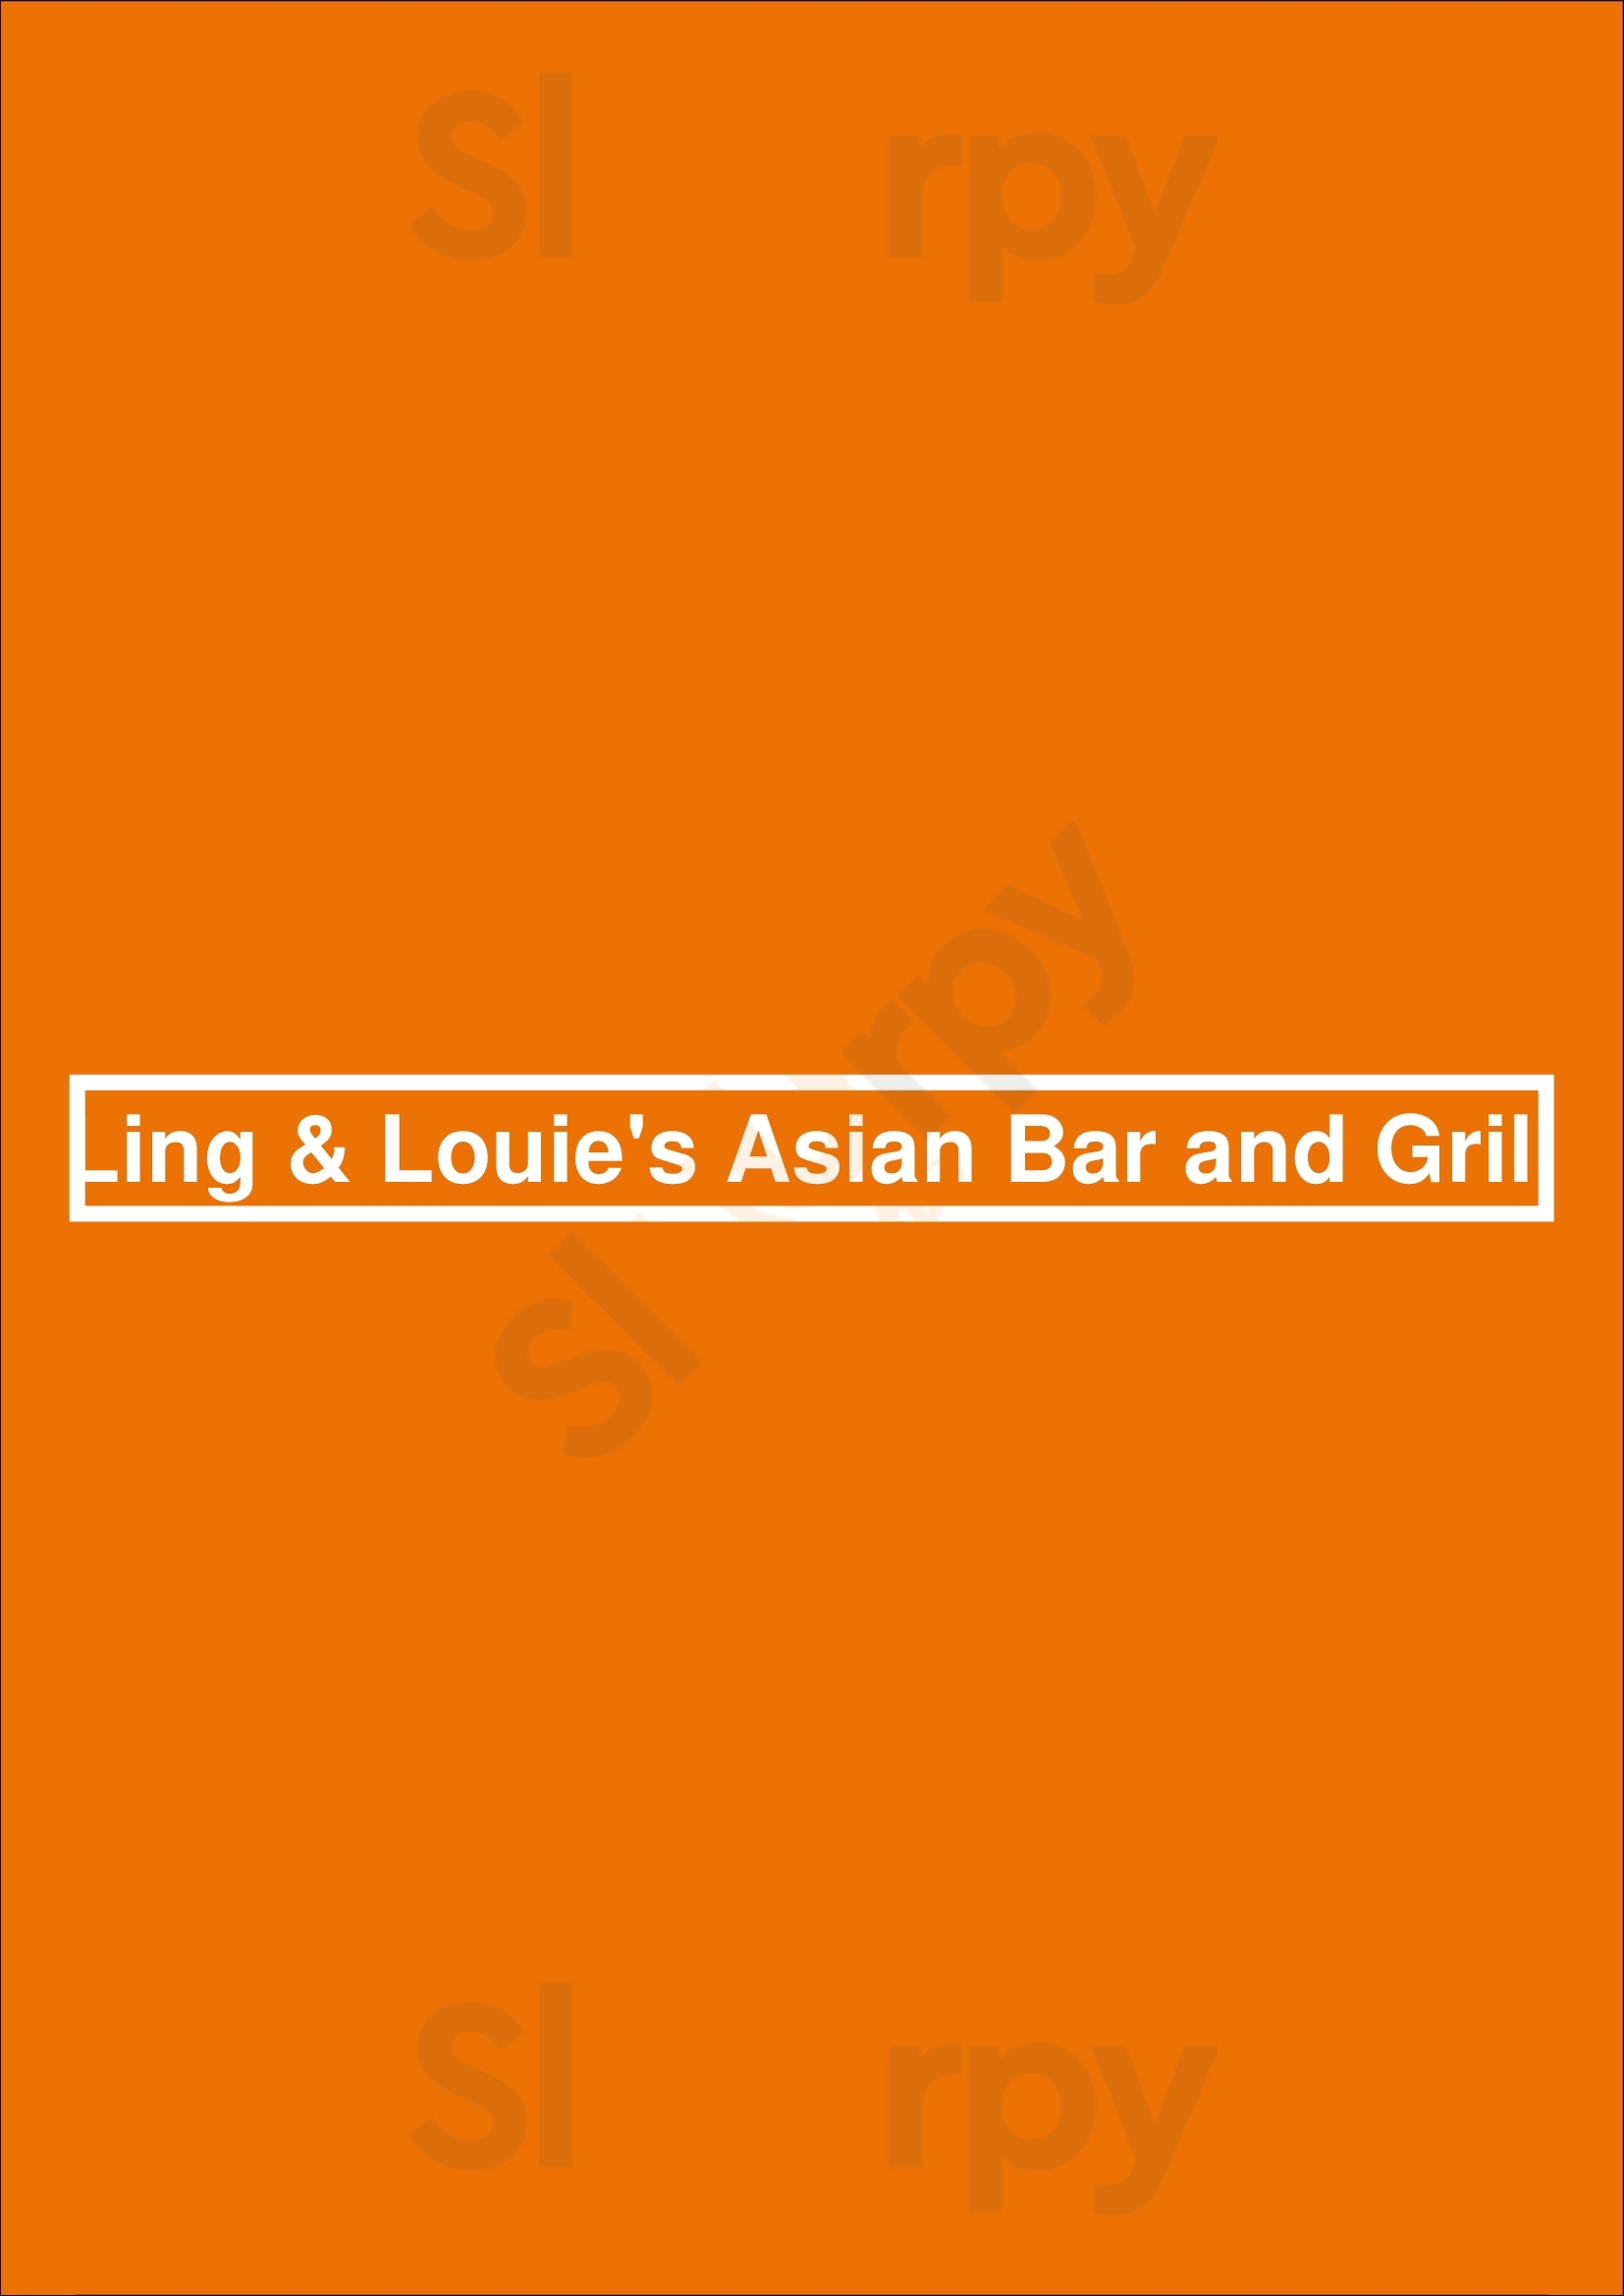 Ling & Louie's Asian Bar And Grill Scottsdale Menu - 1